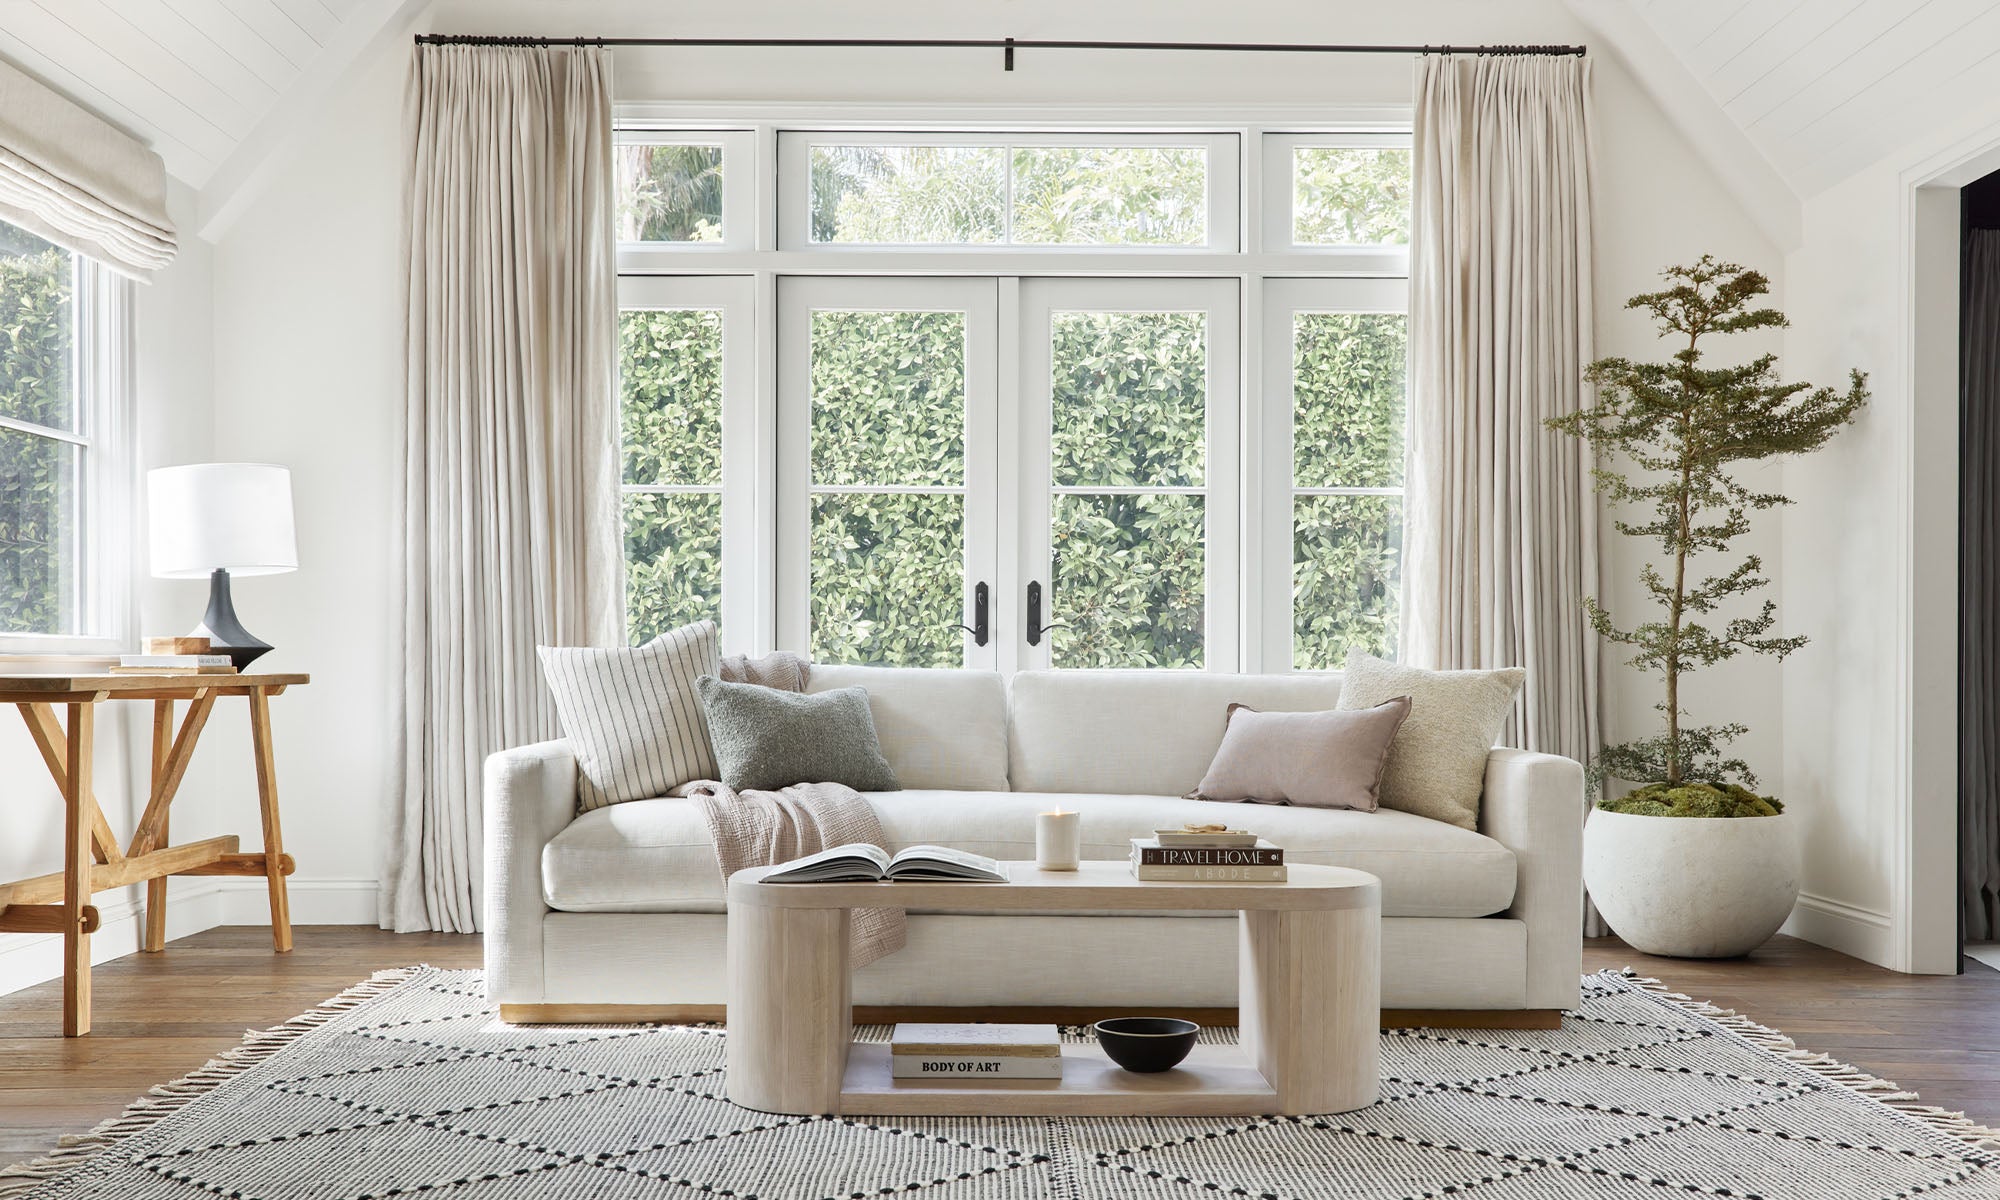 A Curtains Guide: Choosing Curtains for Your Home